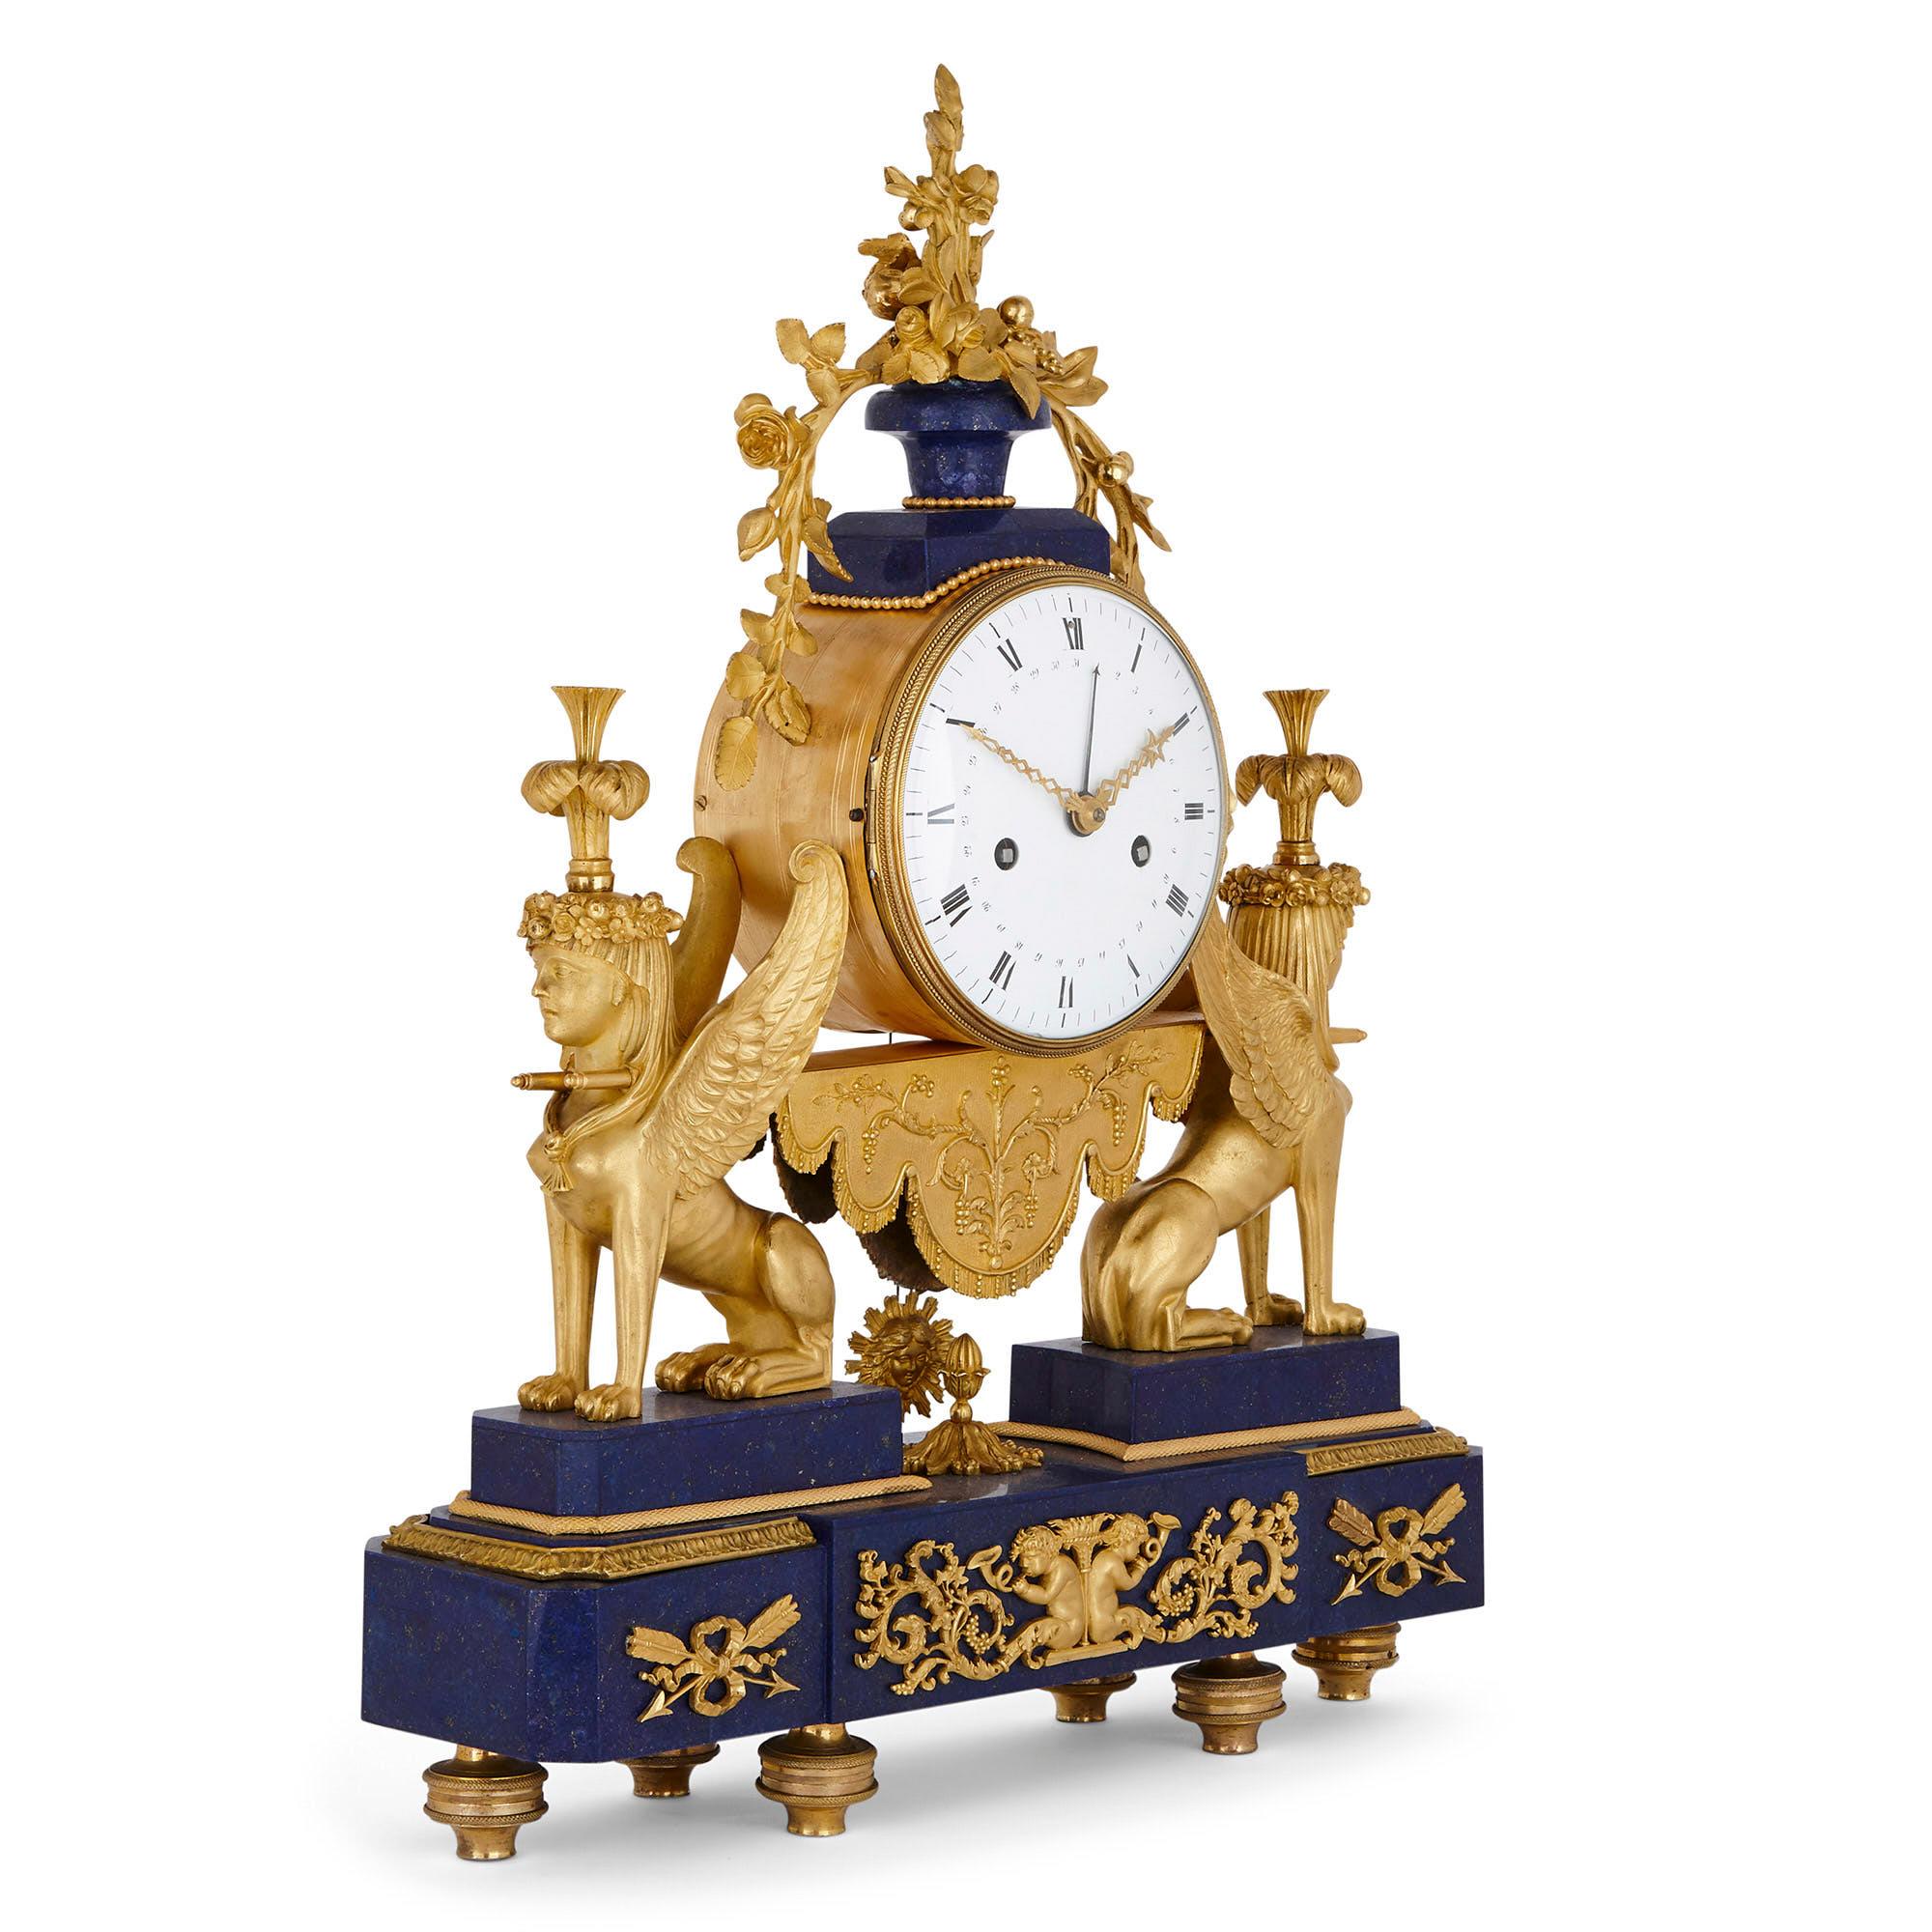 This exquisite early 19th century mantel clock is mounted with gilt bronze and has benefited from the addition of a later lapis lazuli veneer. The clock is formed of a cylindrical clock drum inset with a circular dial inscribed with Roman numerals.